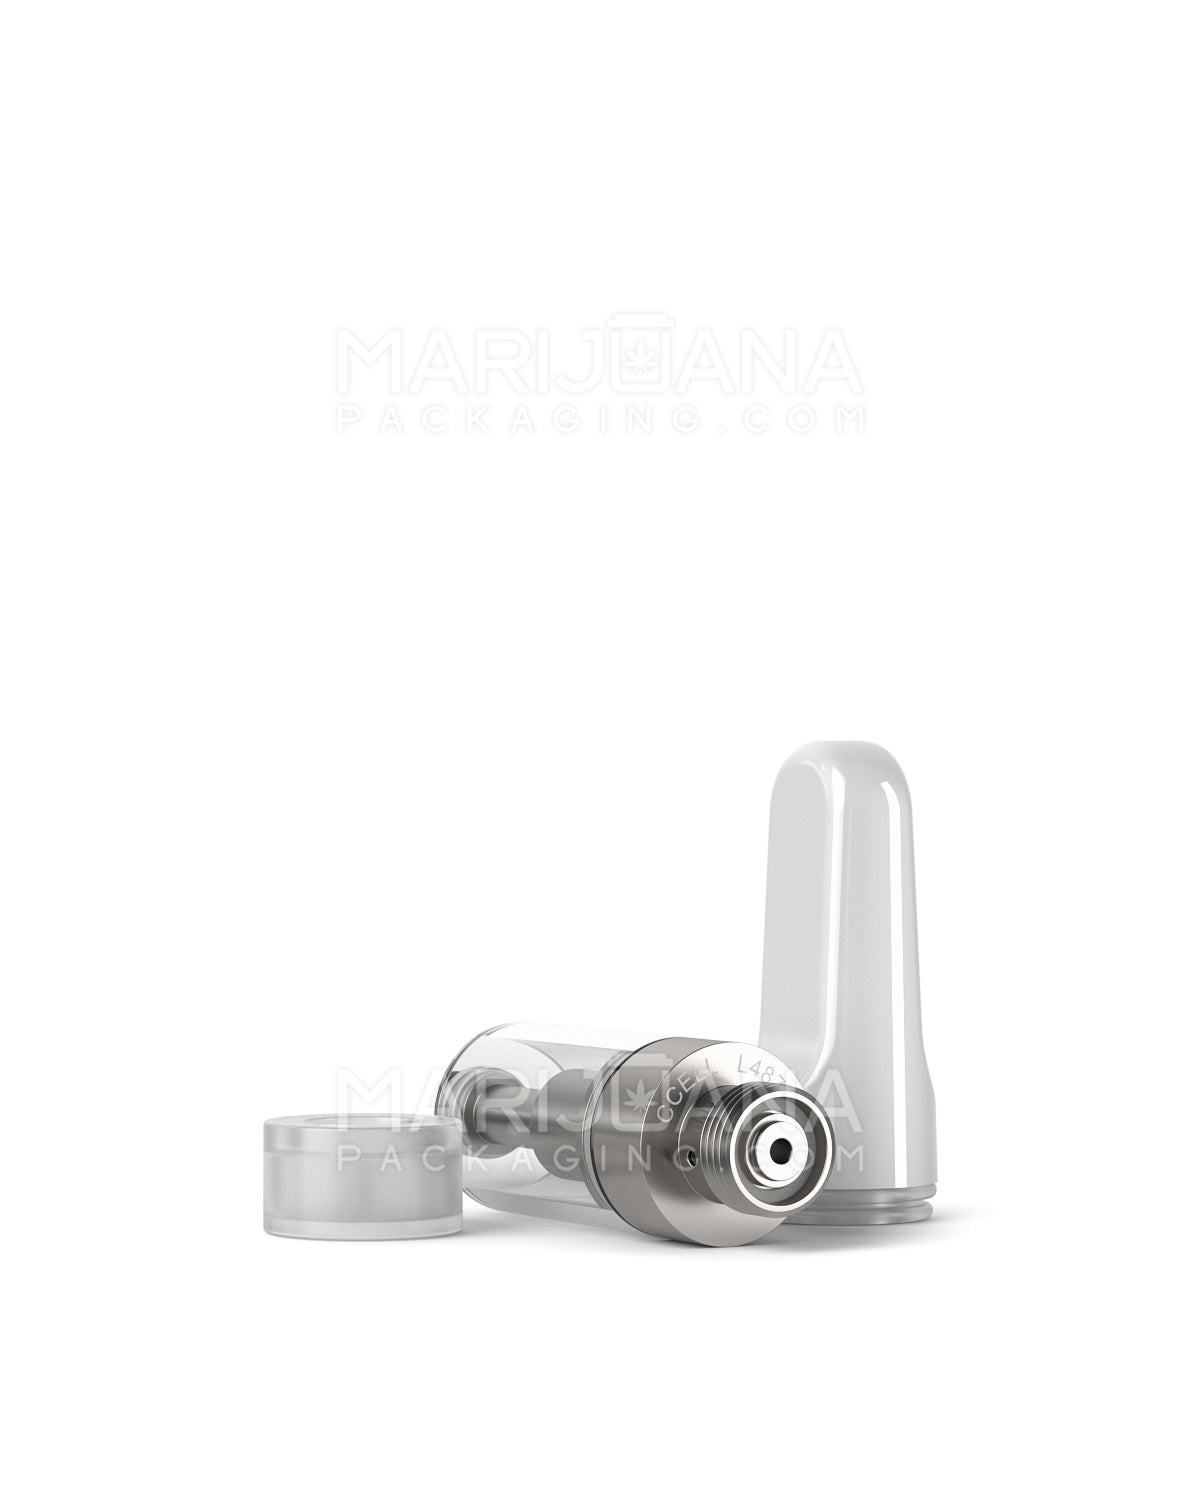 CCELL | Liquid6 Reactor Glass Vape Cartridge with White Ceramic Mouthpiece | 0.5mL - Screw On - 100 Count - 8